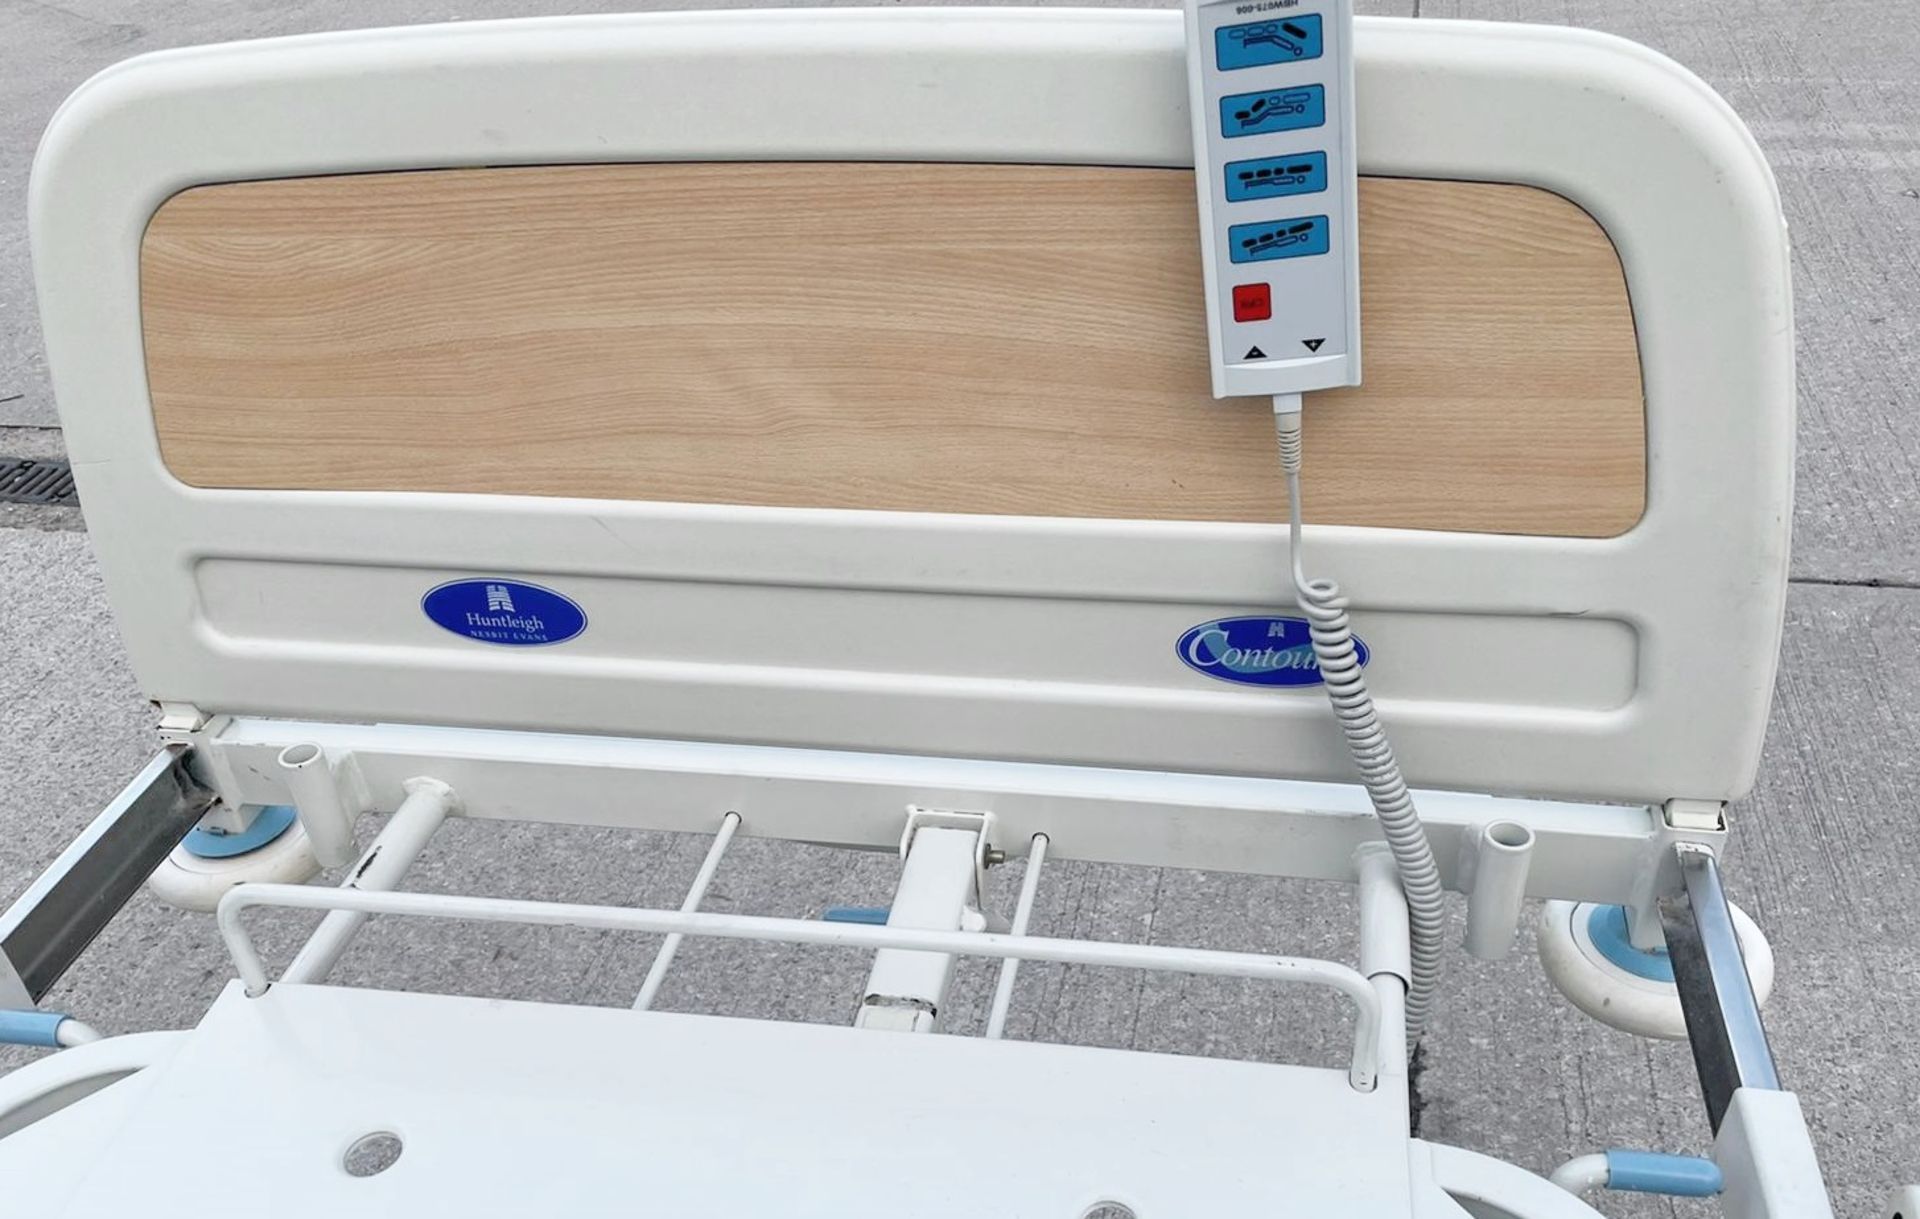 1 x Huntleigh CONTOURA Electric Hospital Bed - Features Rise/Fall 3-Way Profiling, Side Rails, - Image 2 of 16